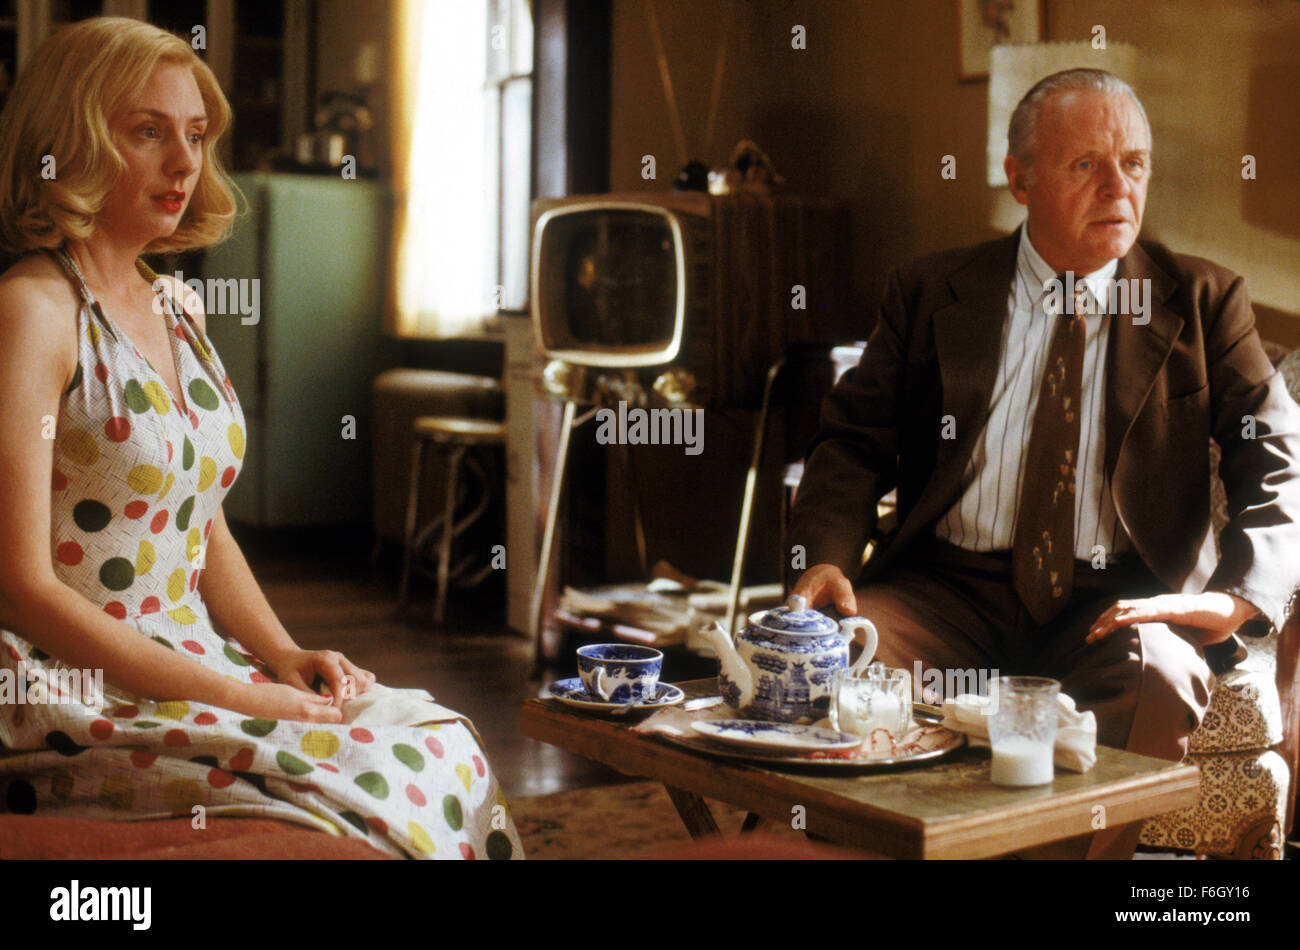 RELEASE DATE: 28 September 2001. MOVIE TITLE: Hearts in Atlantis. STUDIO: Castle Rock Entertainment. PLOT: A widowed mother and her son change when a mysterious stranger enter their lives. PICTURED: HOPE DAVIS as Liz Garfield and ANTHONY HOPKINS as Ted Brautigan. Stock Photo